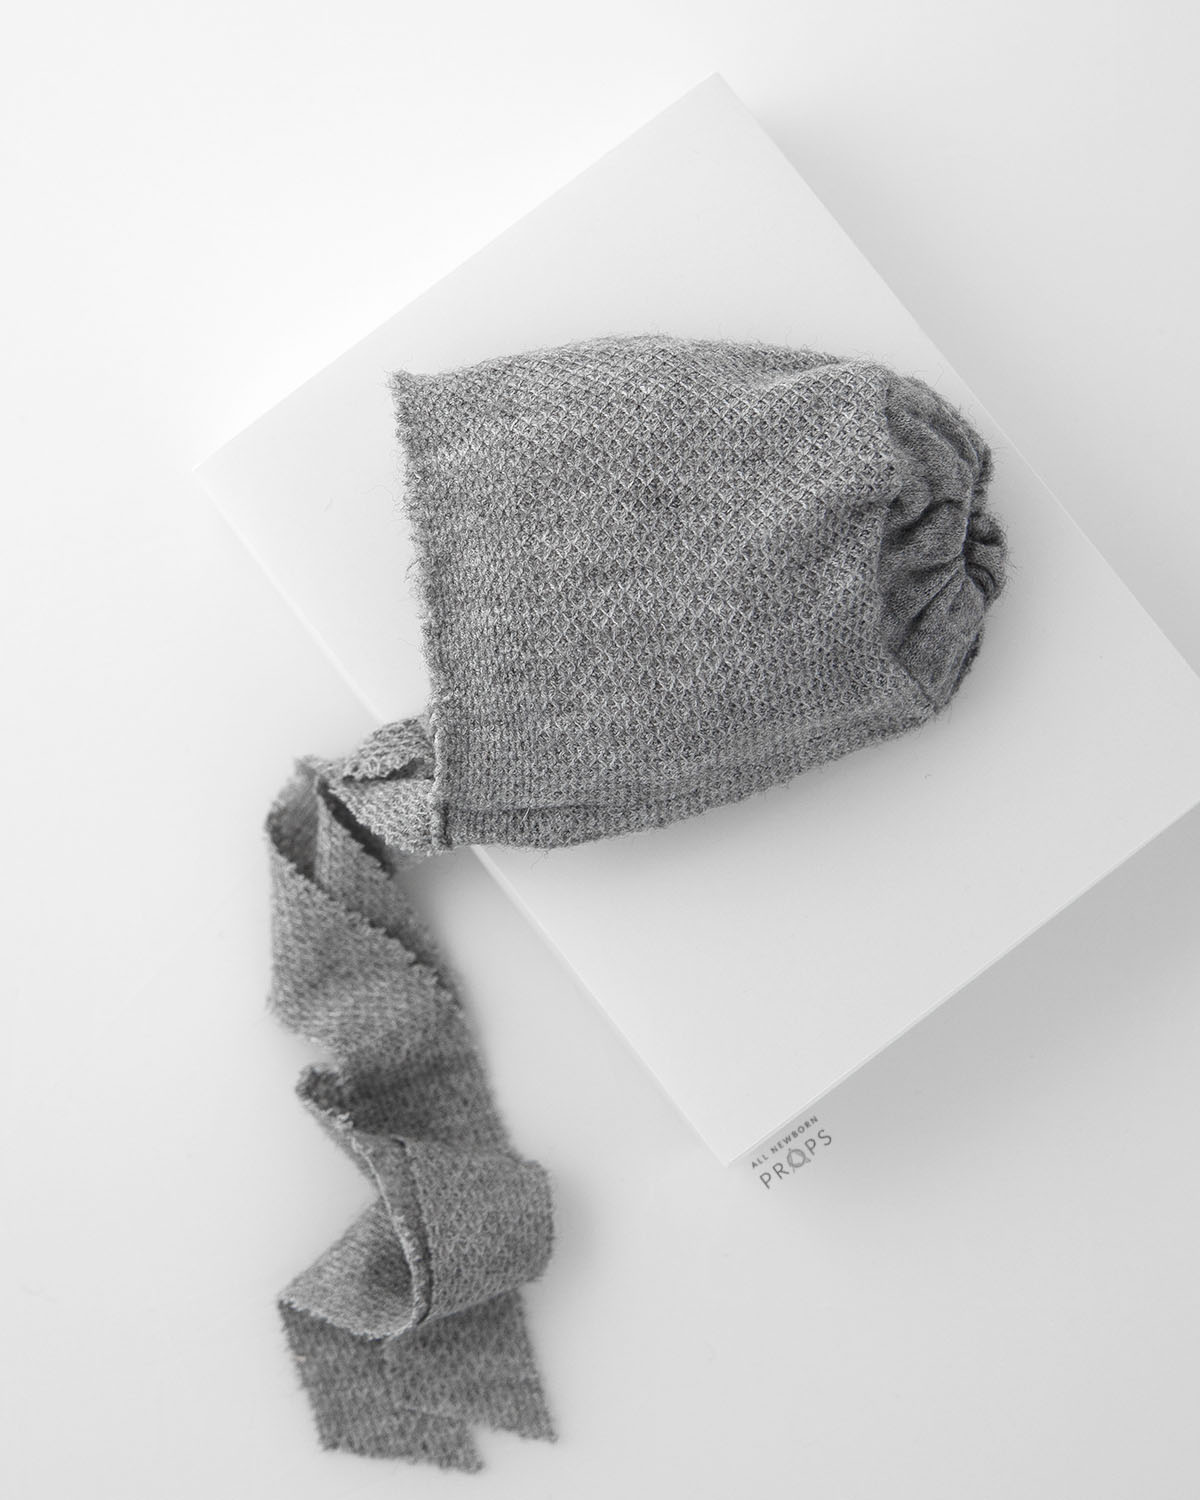 baby-photography-hats-boy-grey-knitted-newbornprops-europe